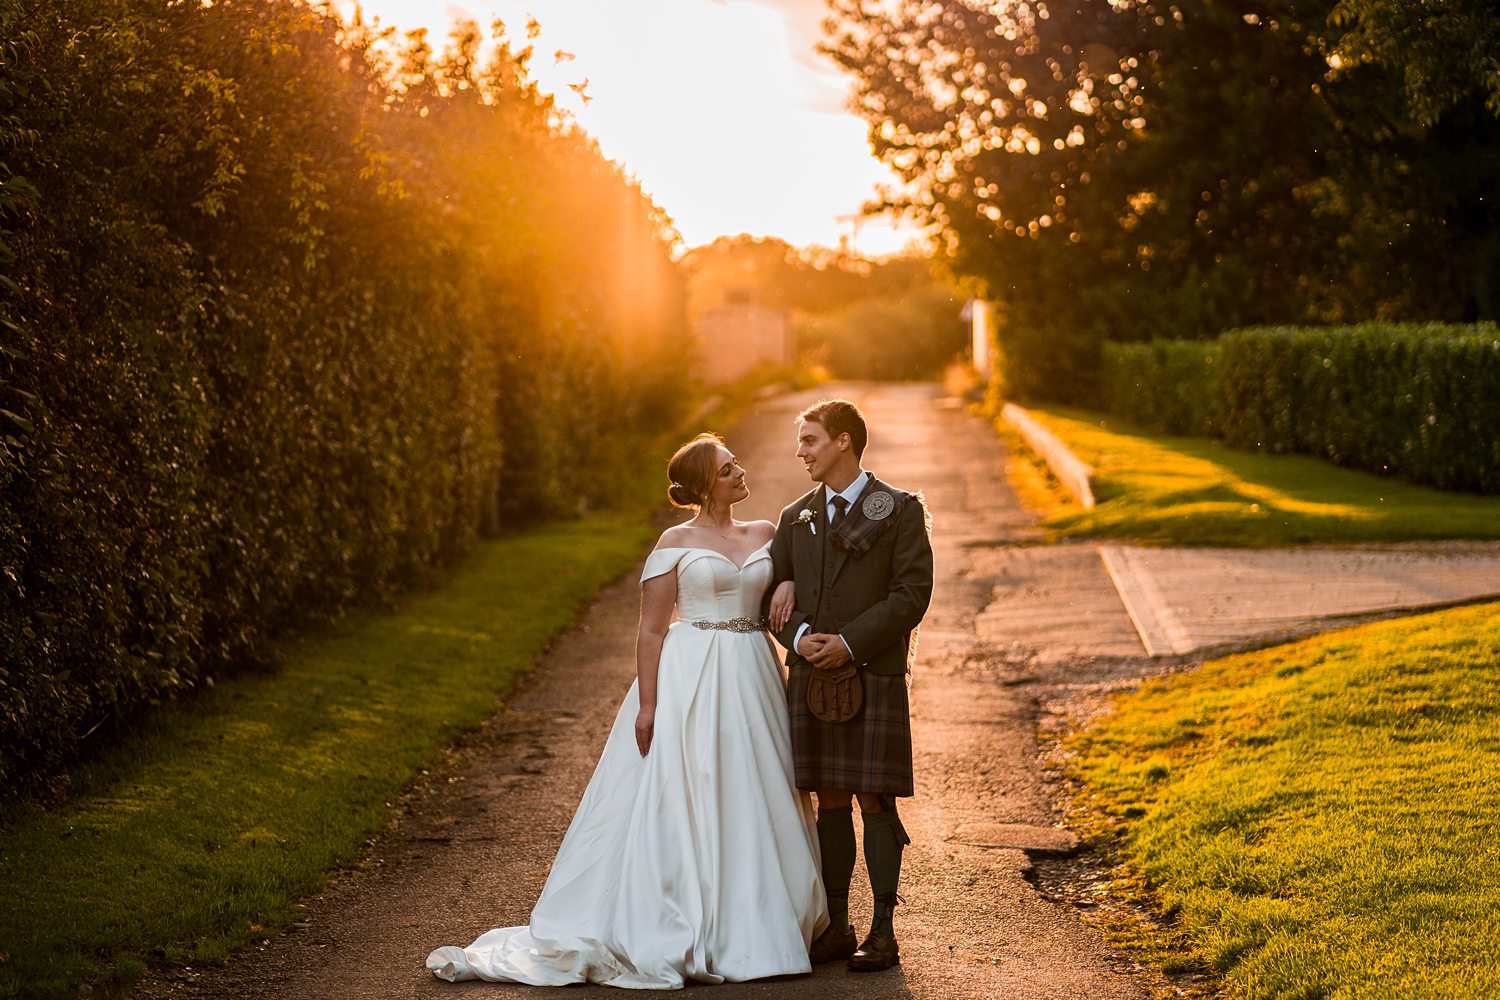 Couple in wedding attire smiling at sunset.